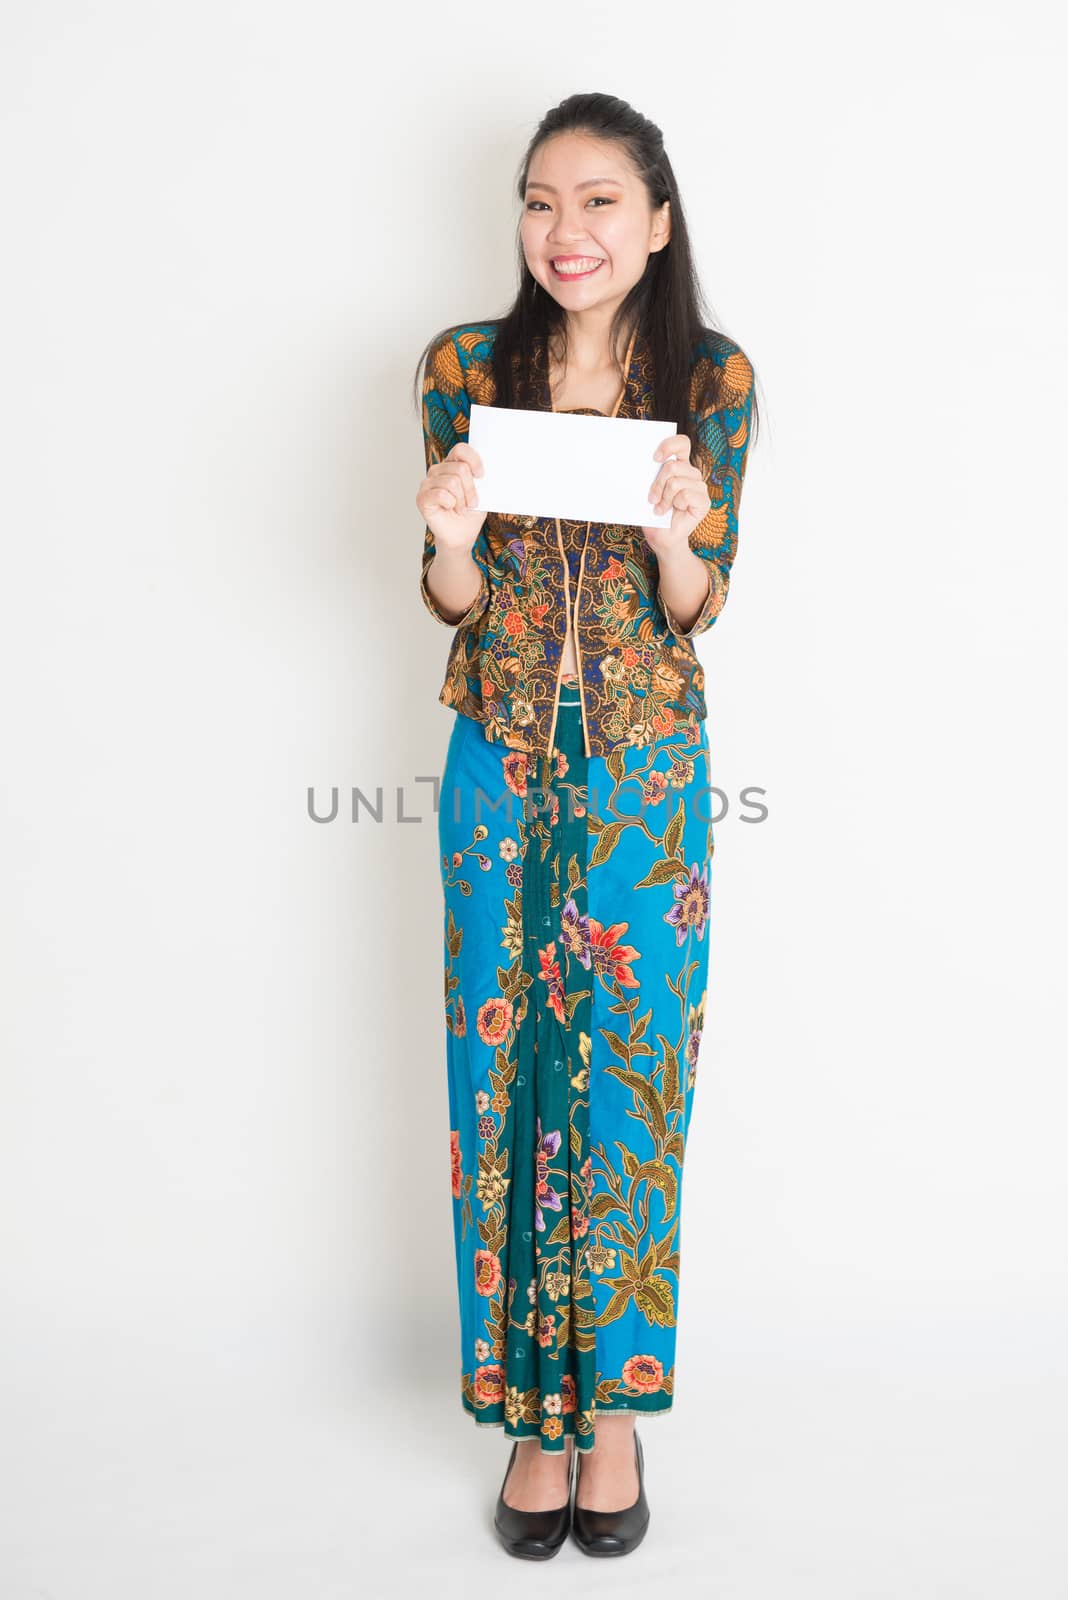 Southeast Asian girl hand holding a white paper card by szefei